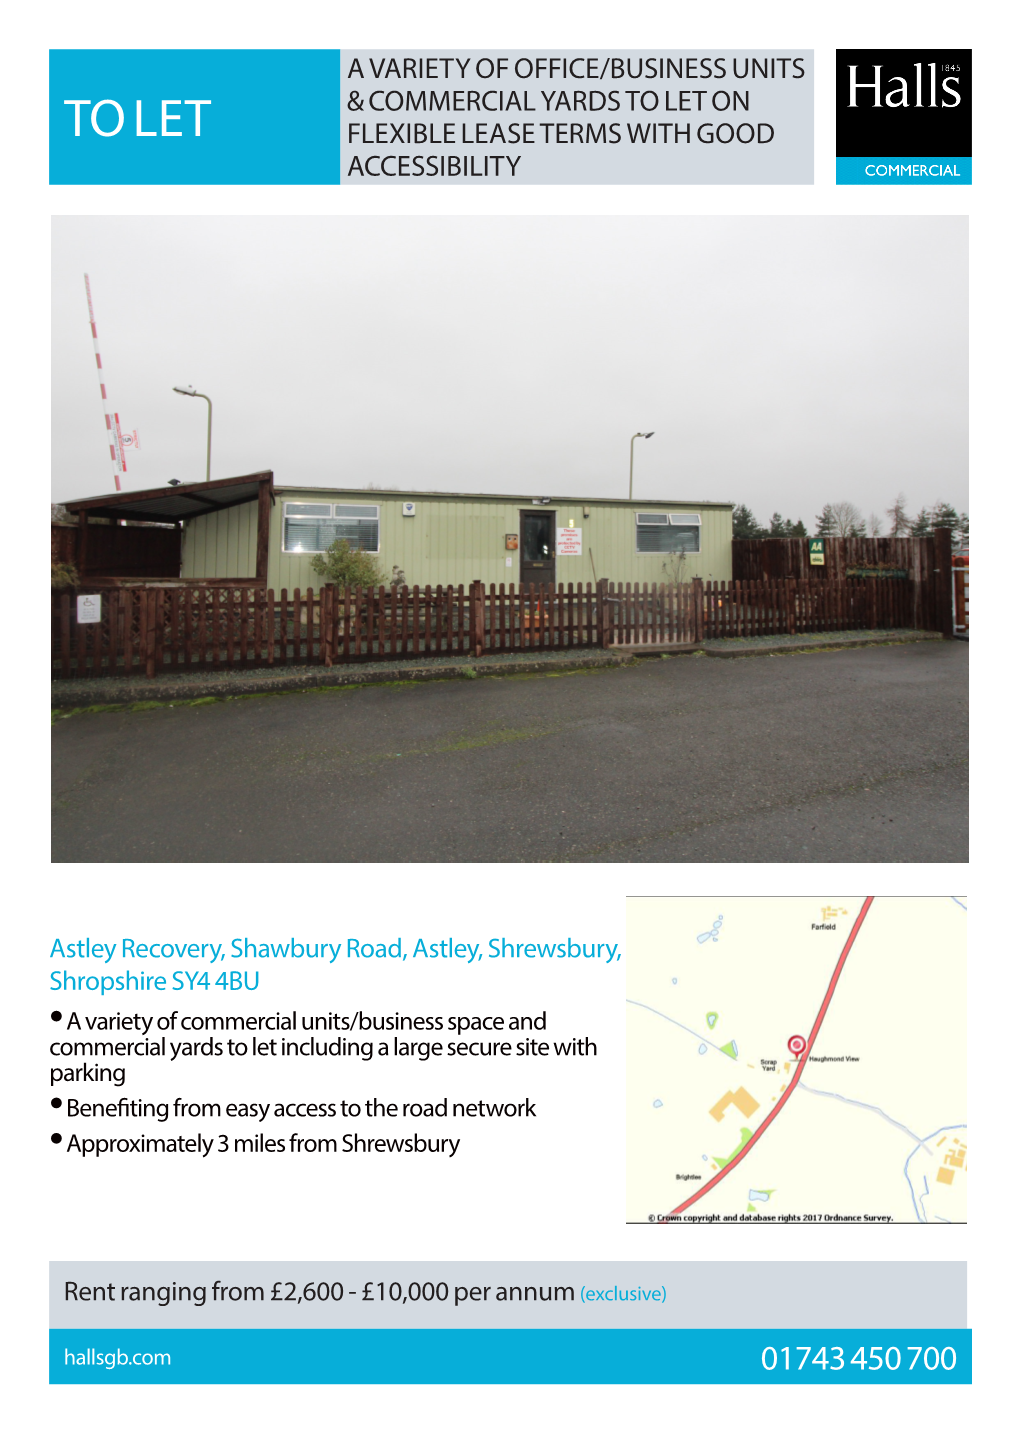 A Variety of Office/Business Units & Commercial Yards to Let on Flexible Lease Terms with Good Accessibility